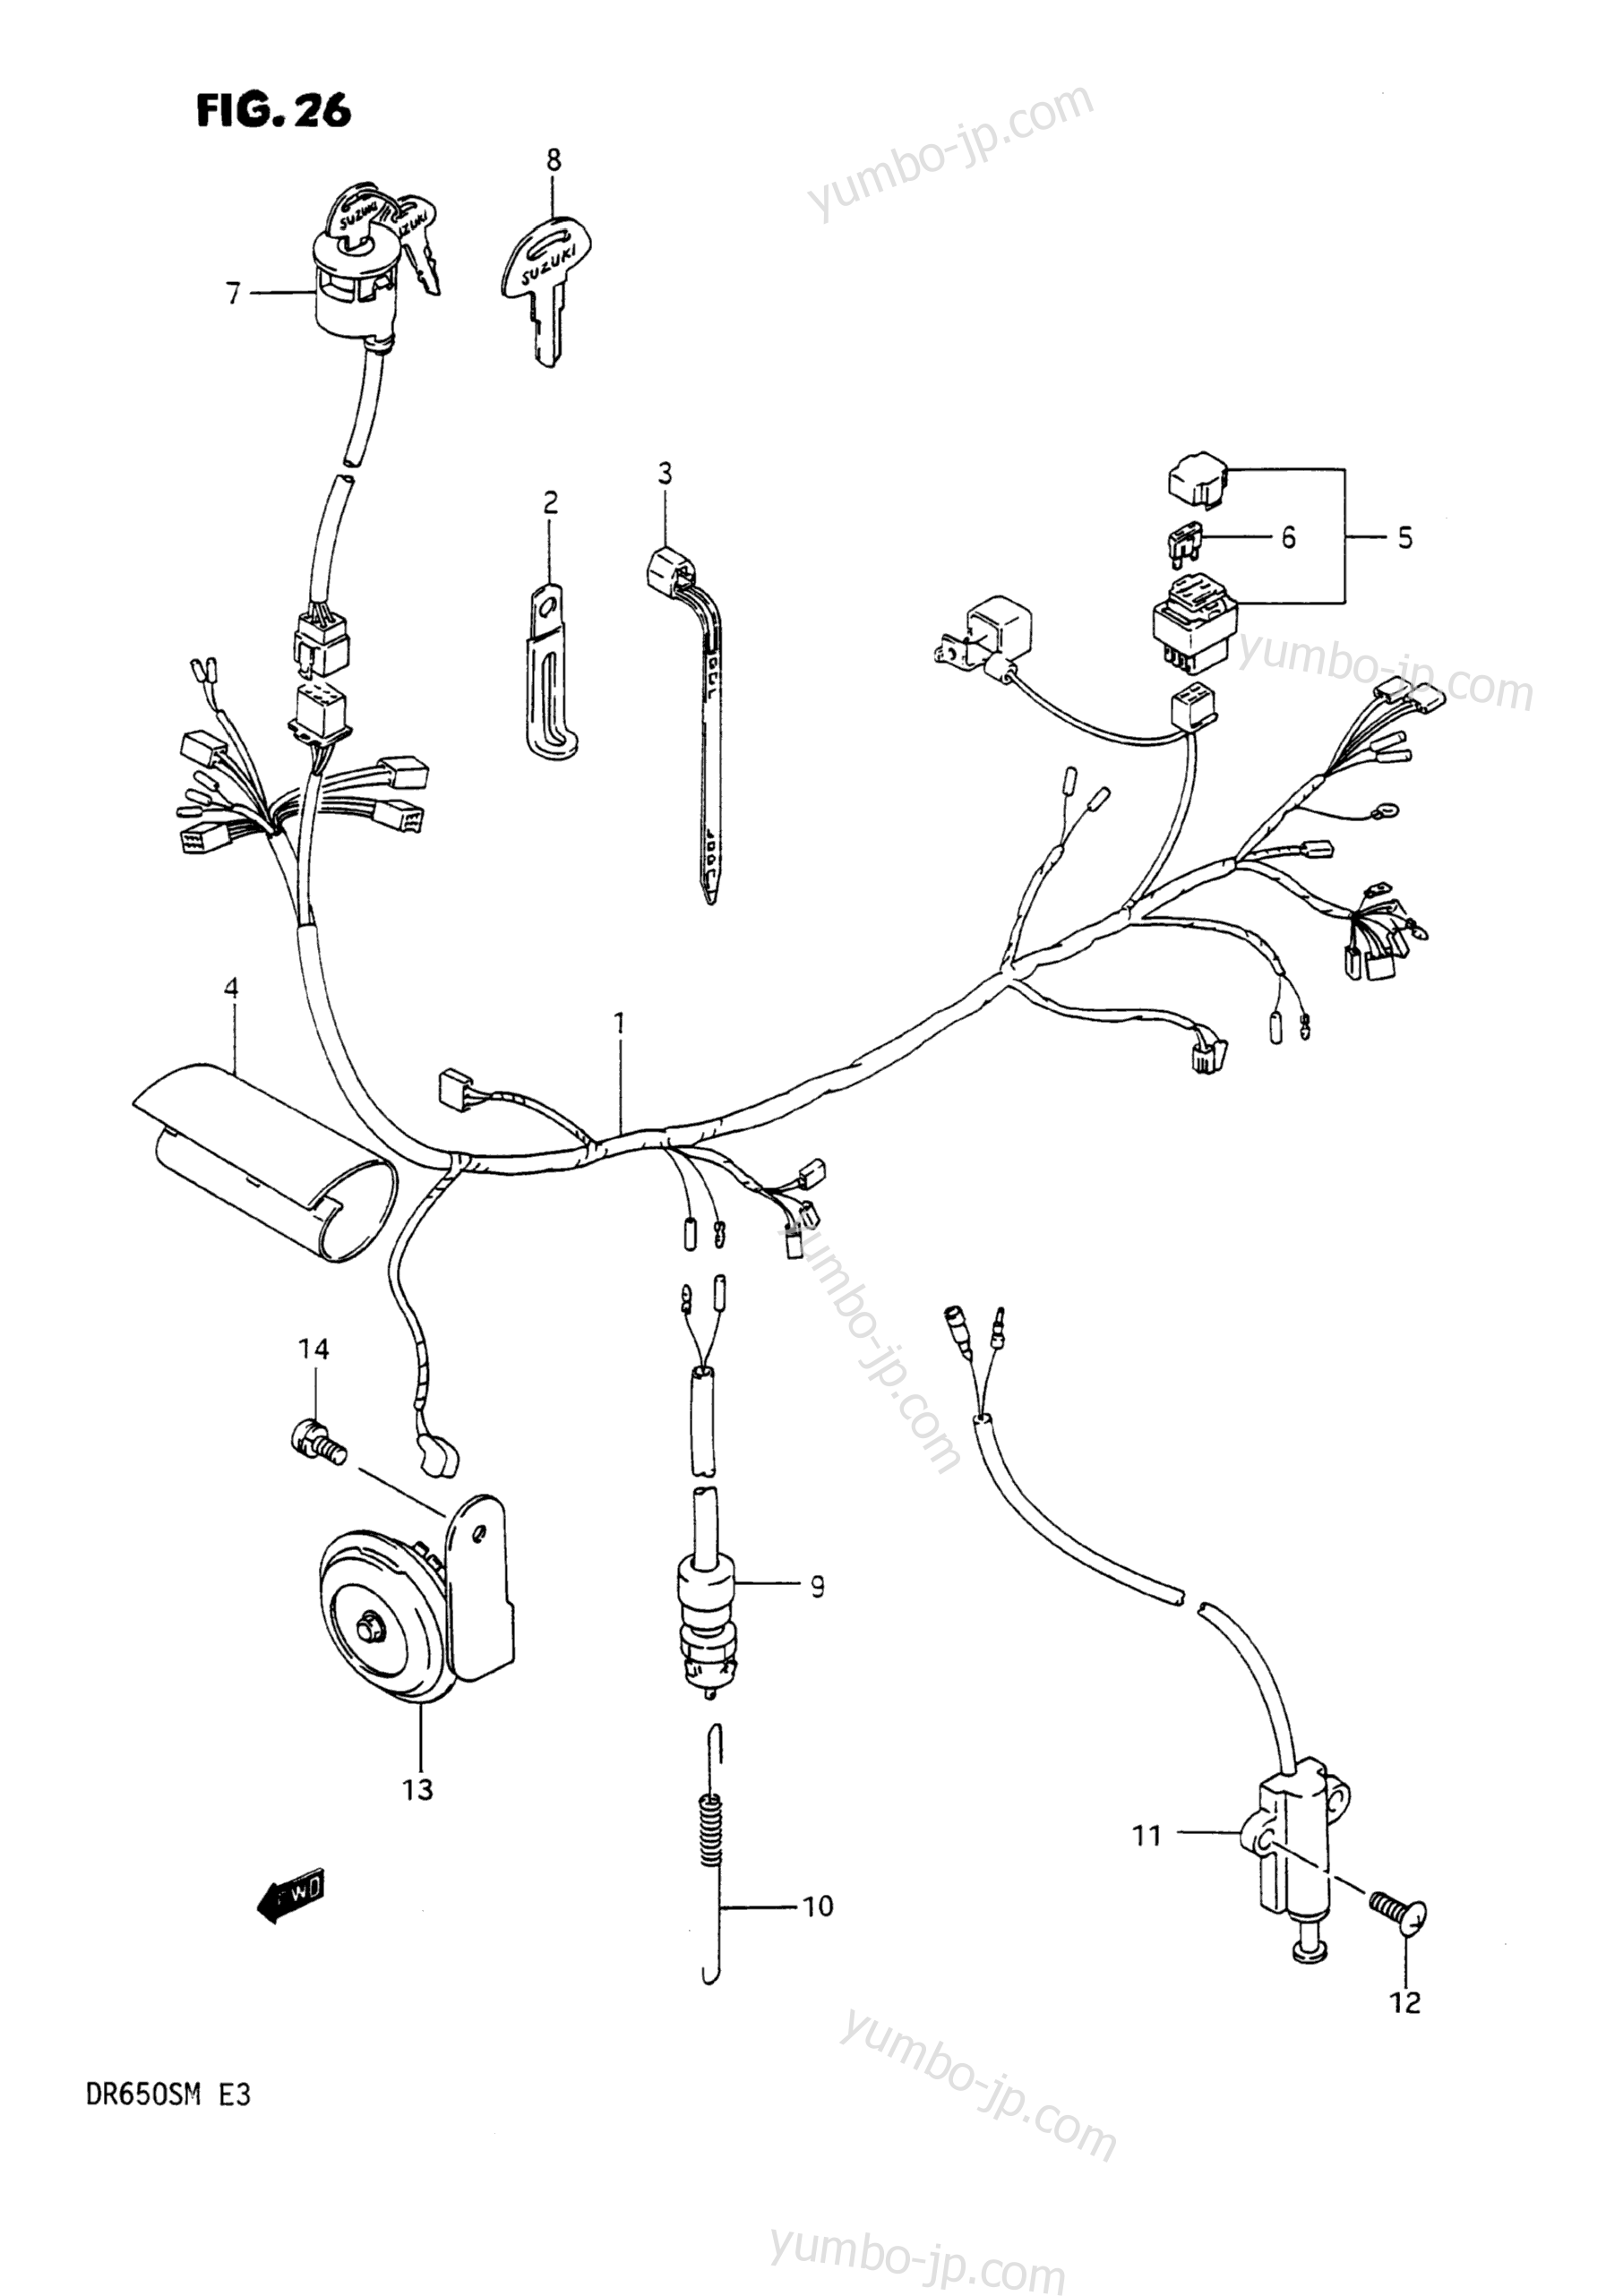 WIRING HARNESS for motorcycles SUZUKI DR650S 1990 year